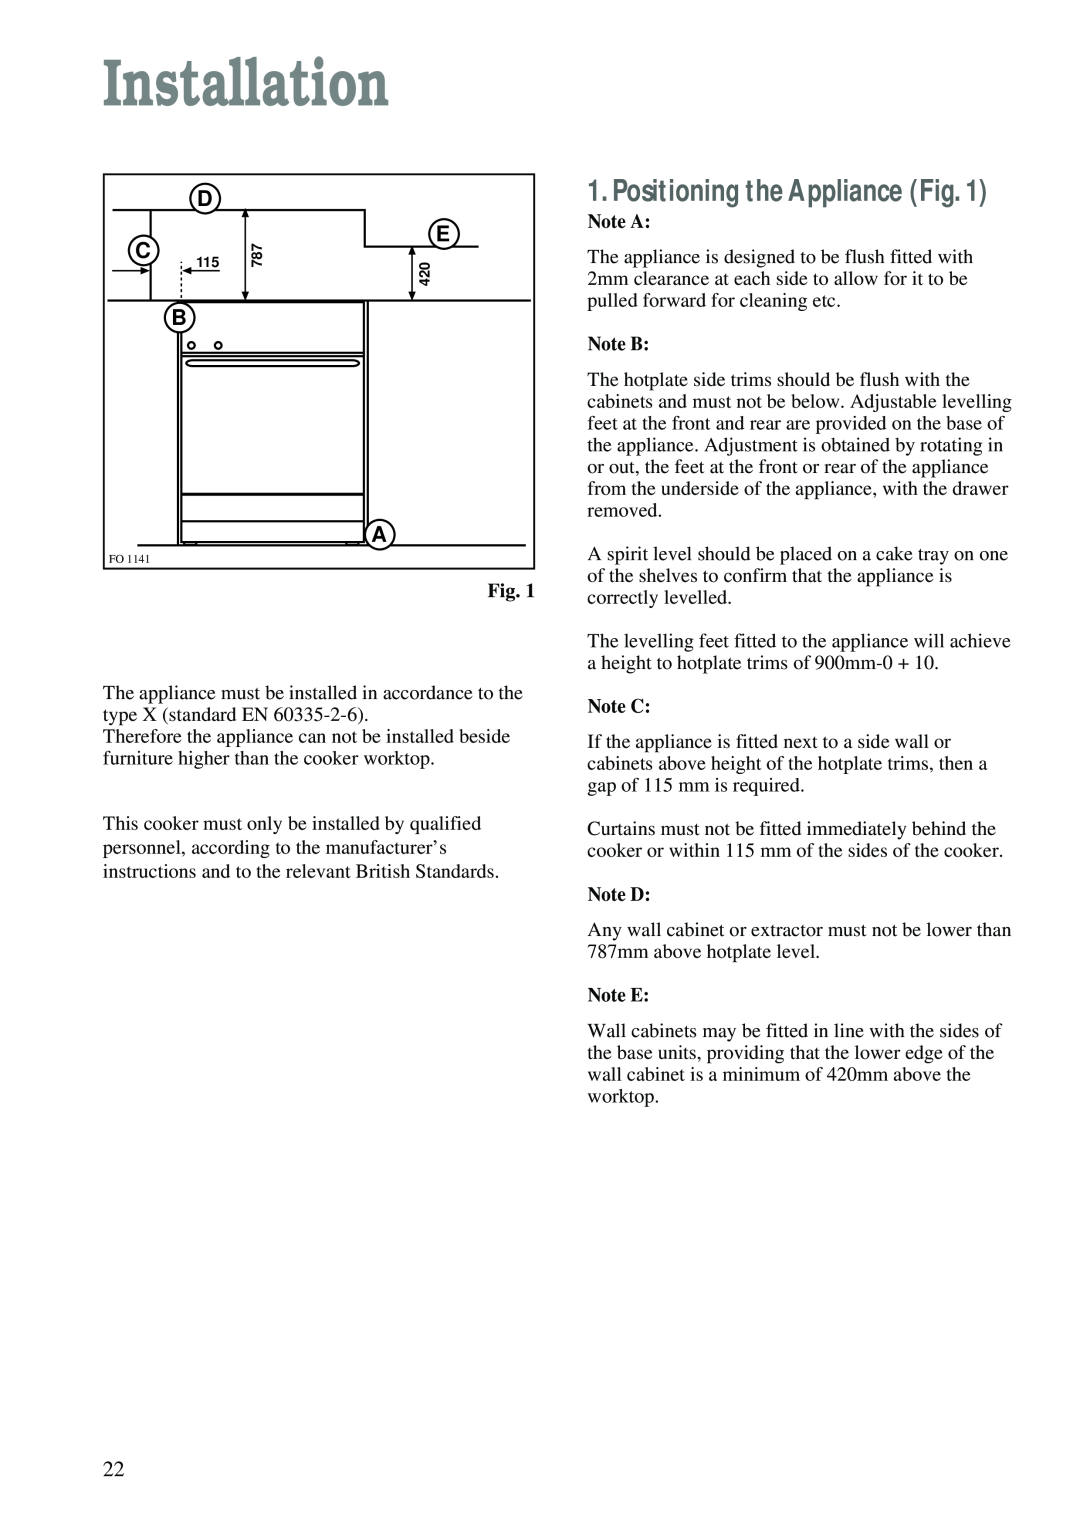 Electrolux CSIG 223 W manual Positioning the Appliance Fig, Note A, Note B, Note C, Note D, Note E, Installation 